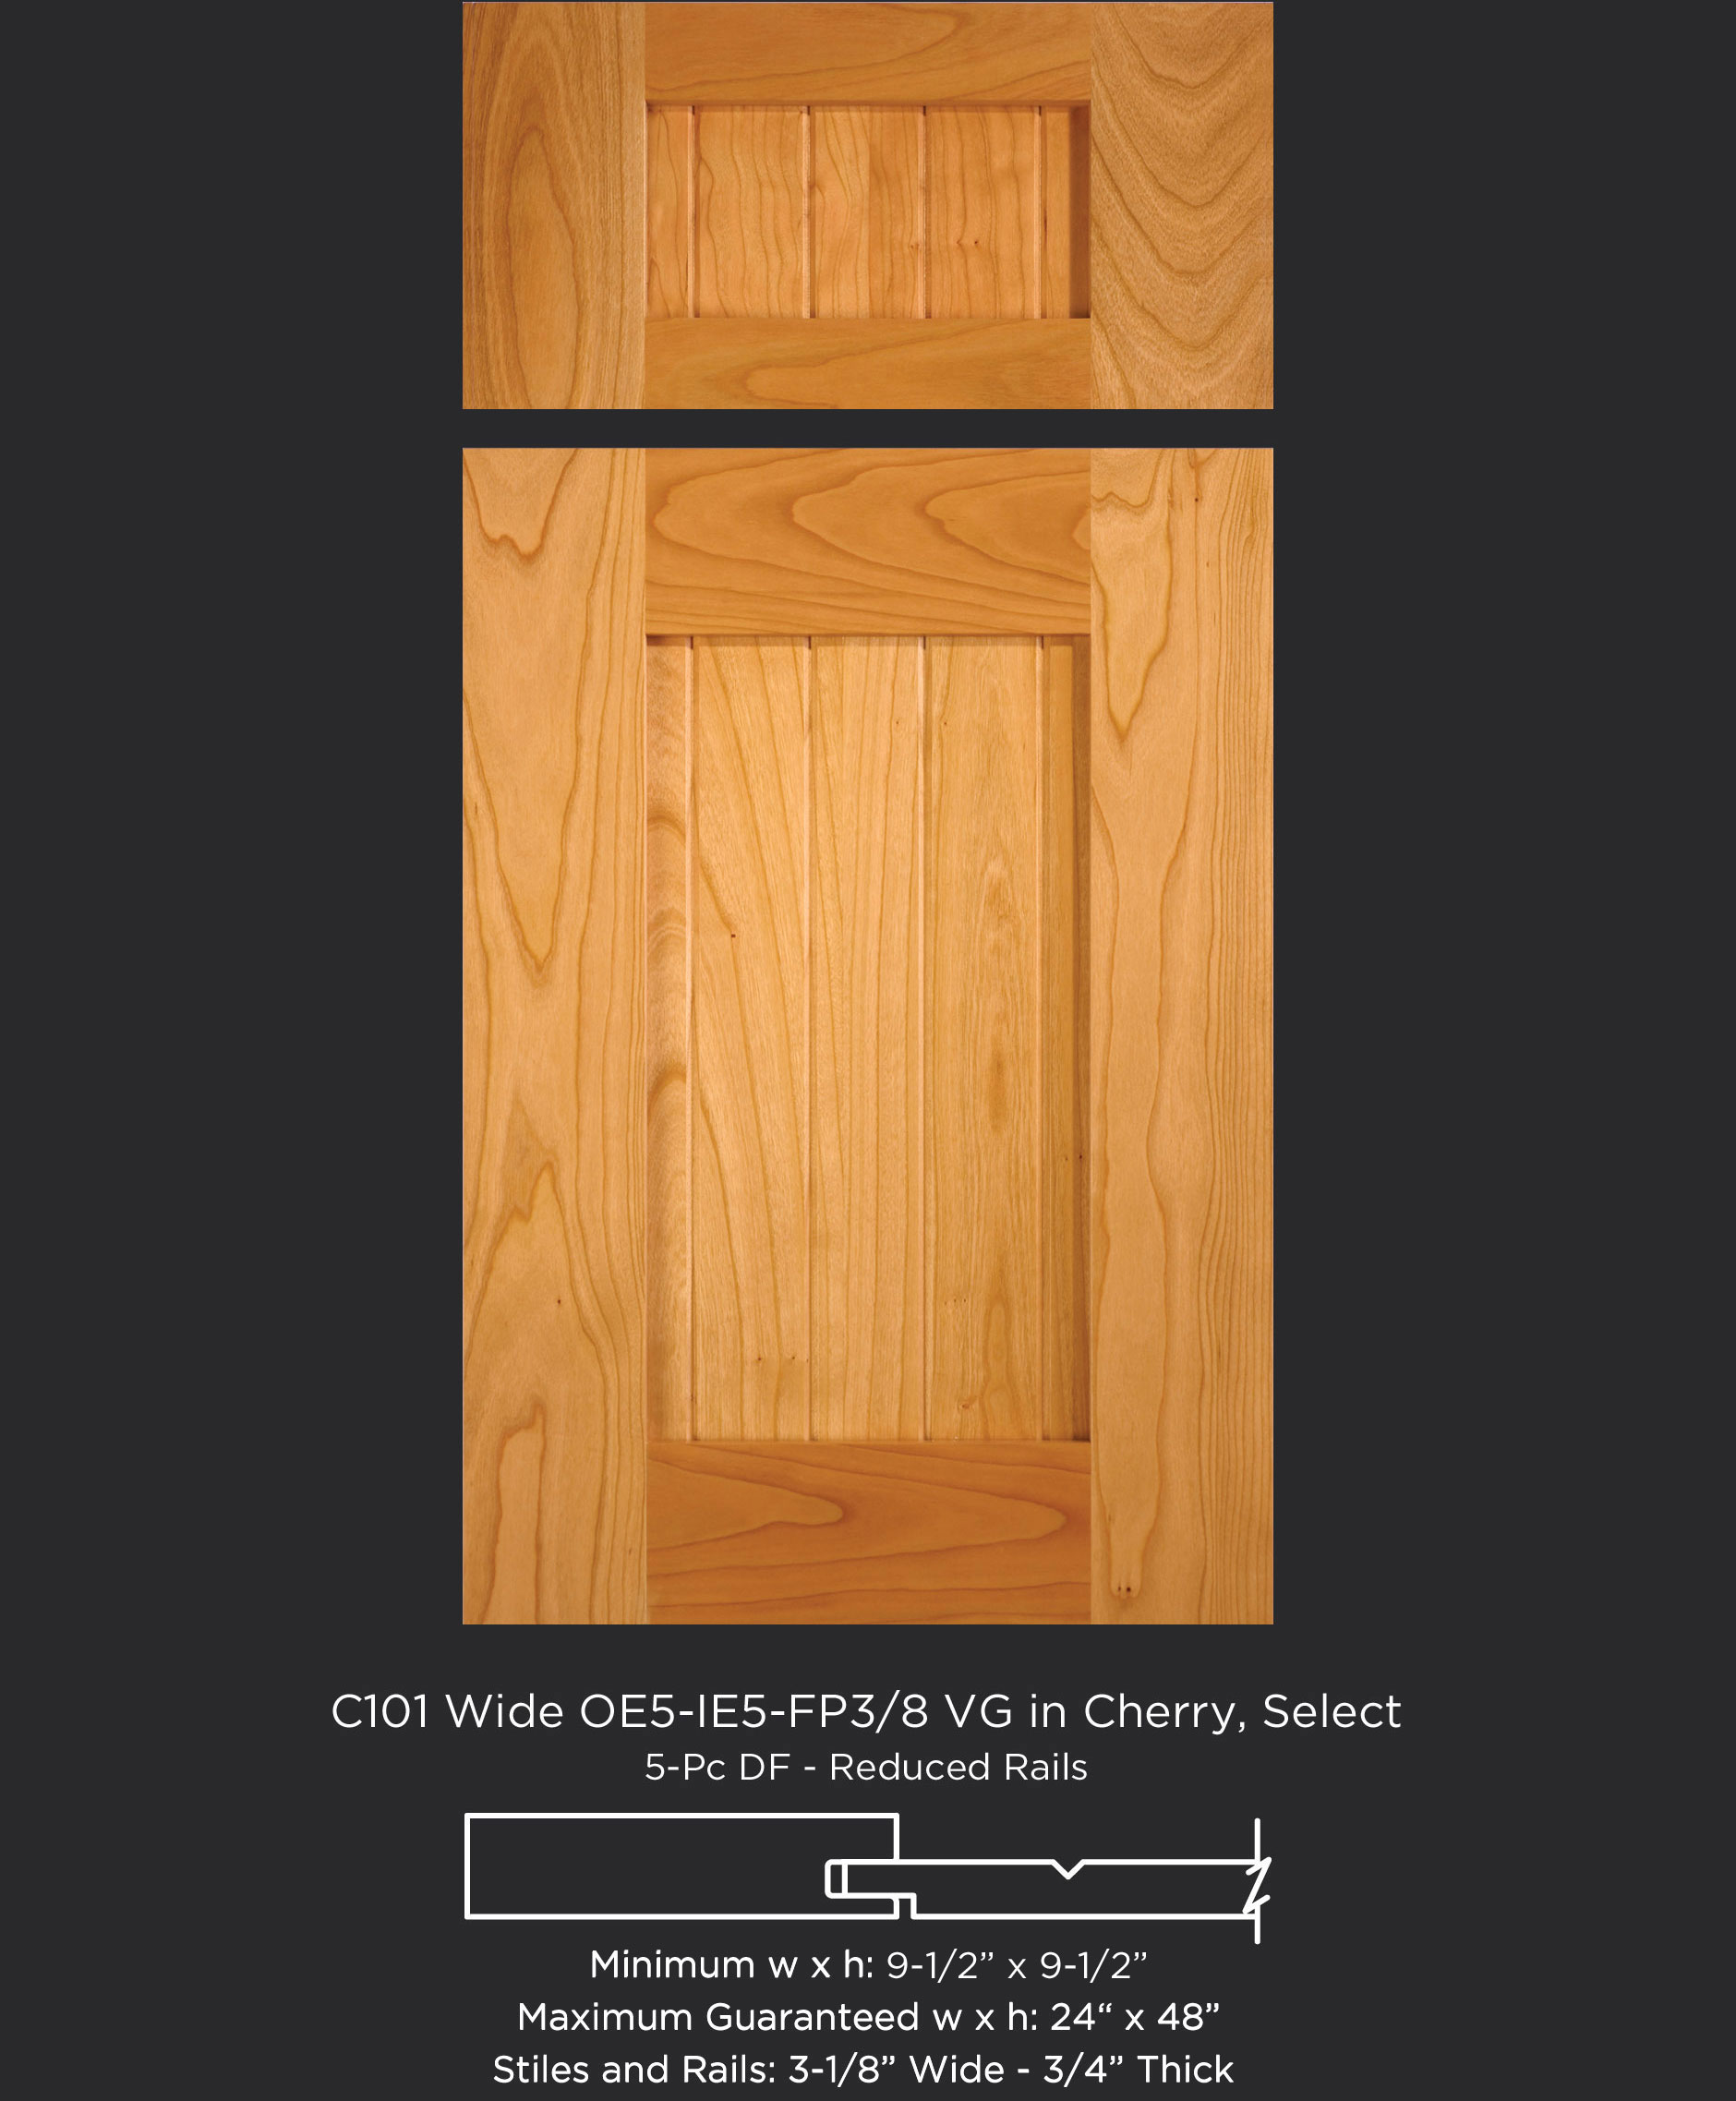 Cope and Stick Cabinet Door C101 Wide OE5-IE5-FP3/8 Cherry, Select and 5-piece drawer front with reduced rails